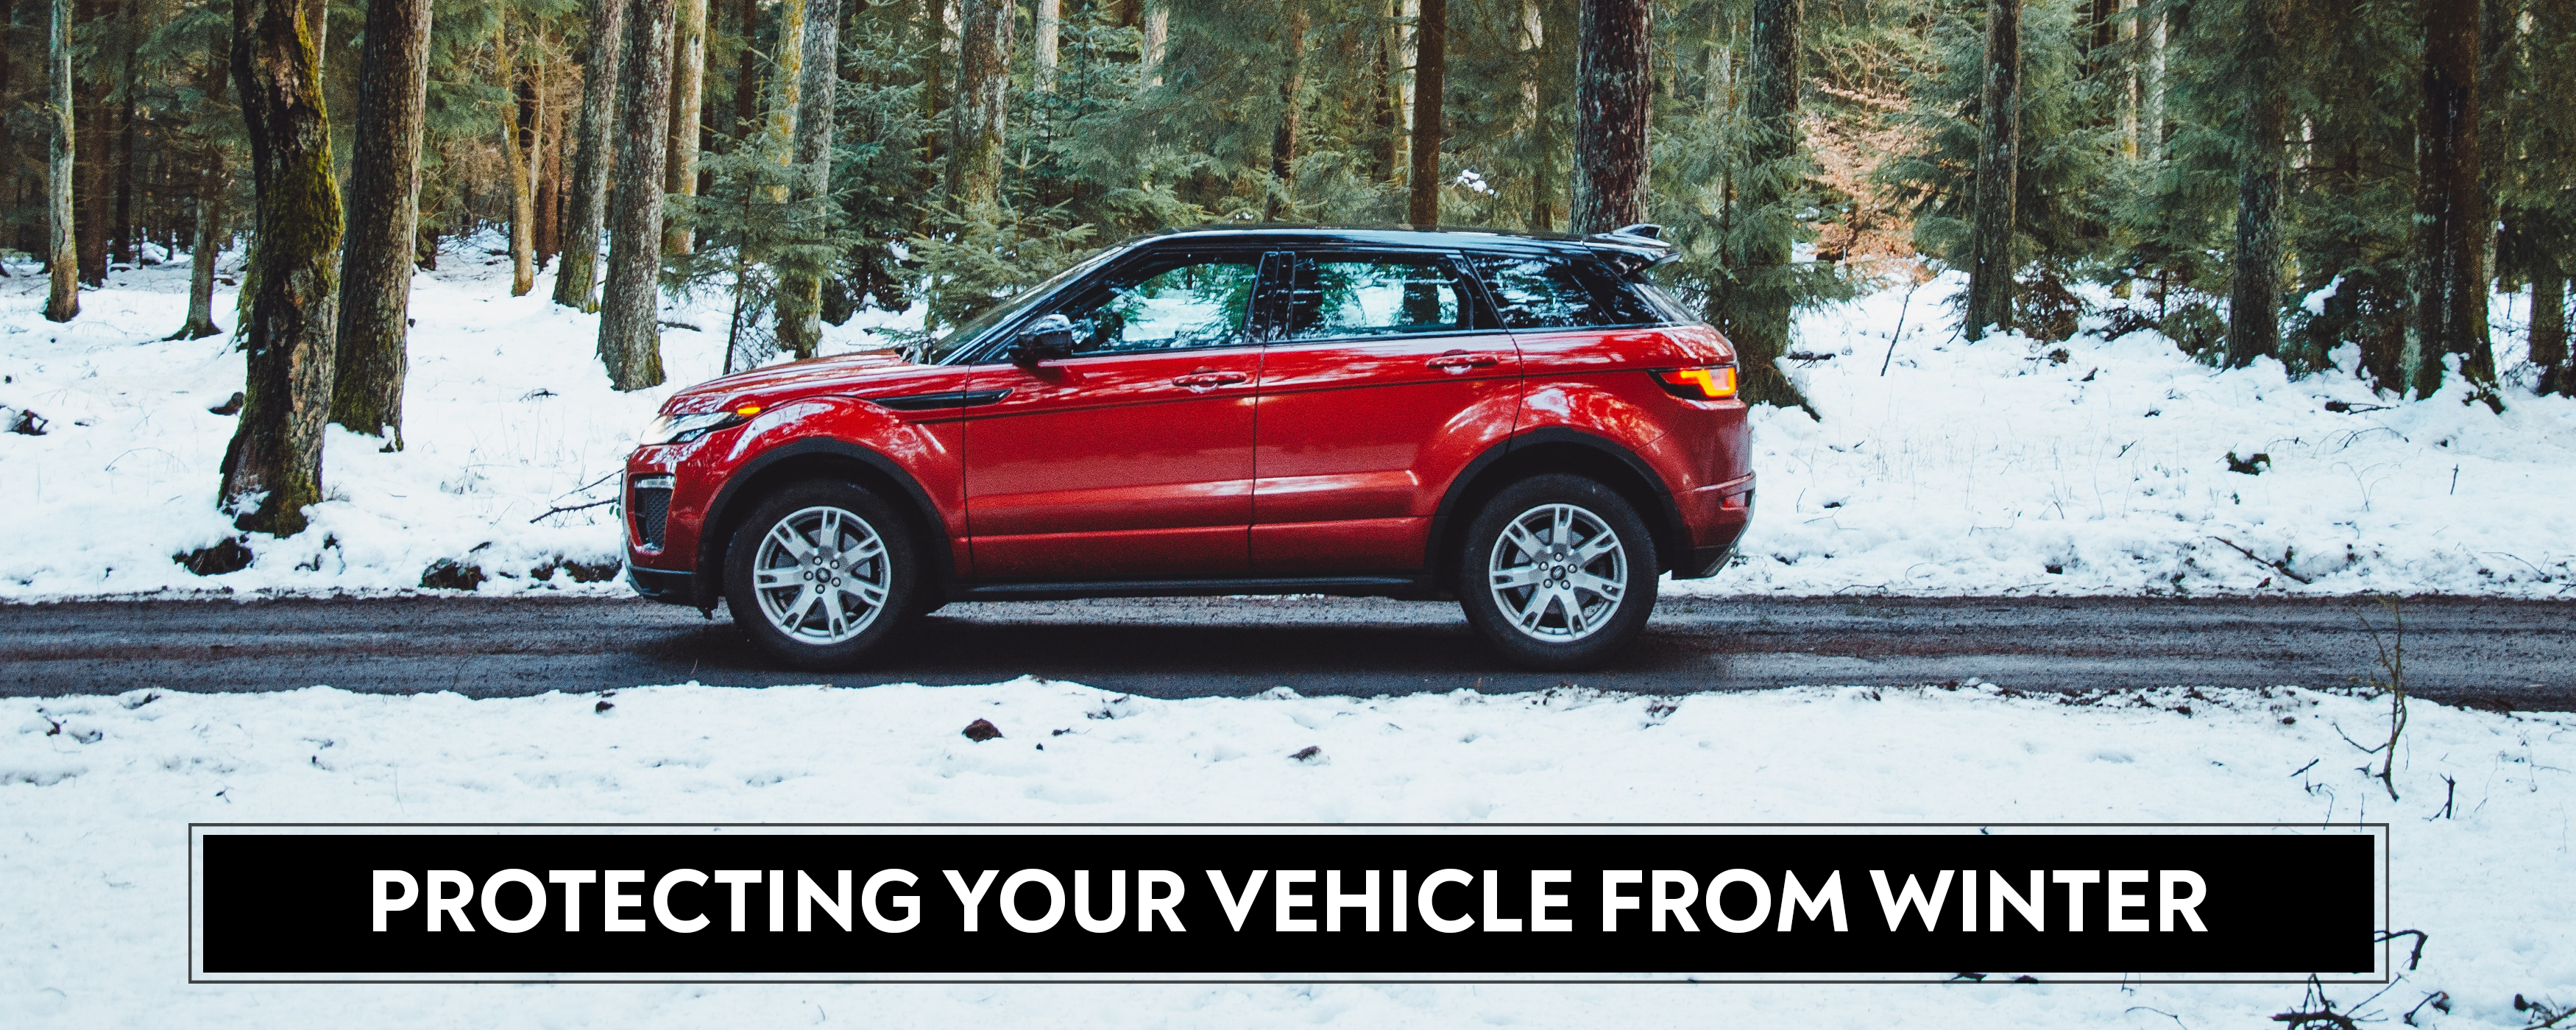 Should You Wax or Apply a Paint Sealant Your Vehicle in The Winter?